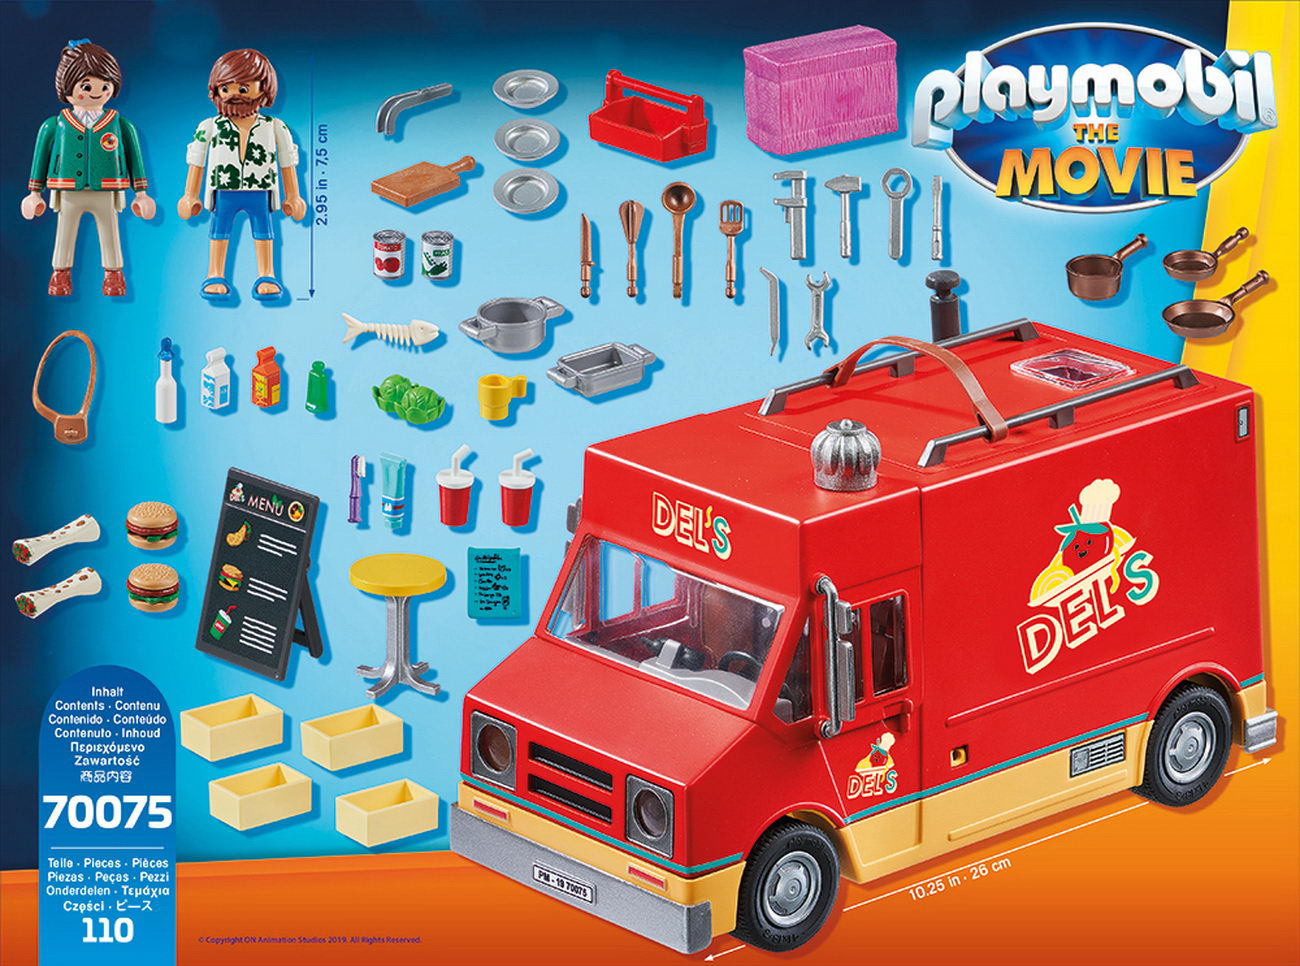 Playmobil 70075 - Dels Food Truck (The Movie)